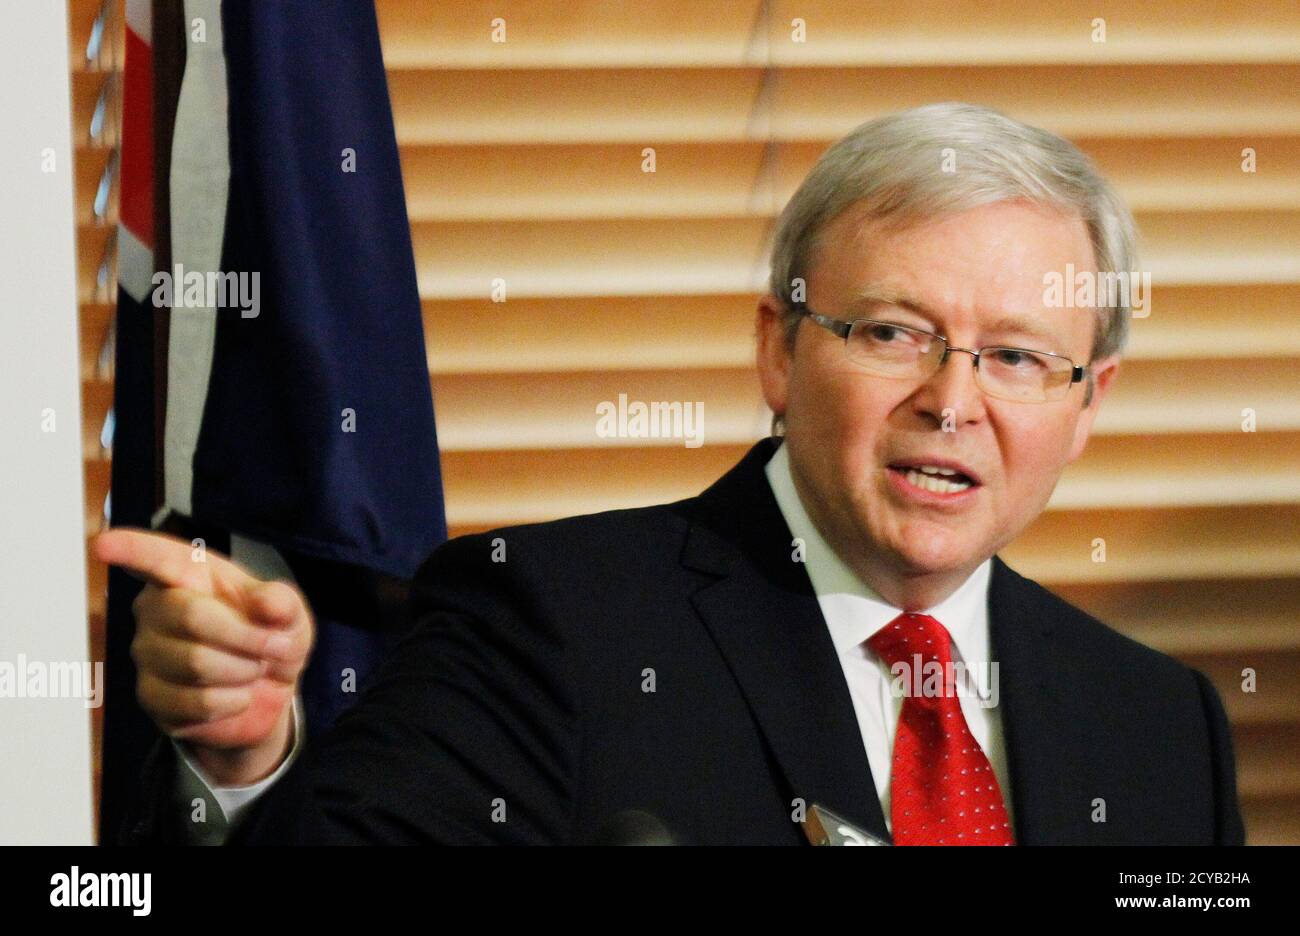 Australia's former Prime Minister Kevin Rudd reacts during a news  conference at Parliament House in Canberra